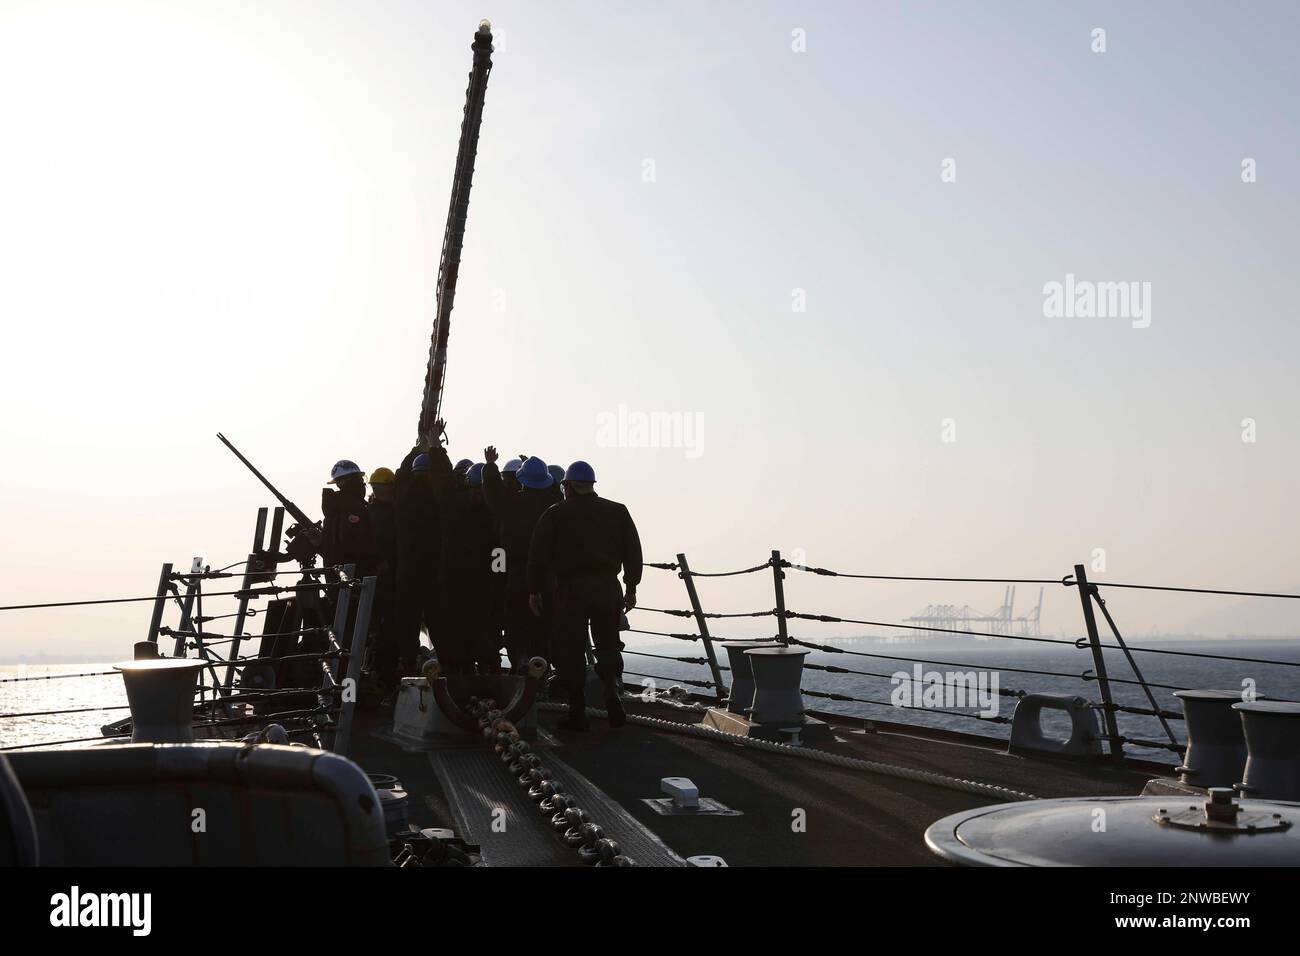 230127-N-JO162-1012 HAIFA, Israel (Jan. 27, 2023) Sailors assigned to guided missile destroyer USS Truxtun (DDG 103) raise the jack-staff while pulling into Haifa, Israel, during a scheduled port visit, Jan. 27, 2023. Truxtun is deployed to U.S. 5th Fleet to help ensure maritime security and stability in the Middle East region. Stock Photo